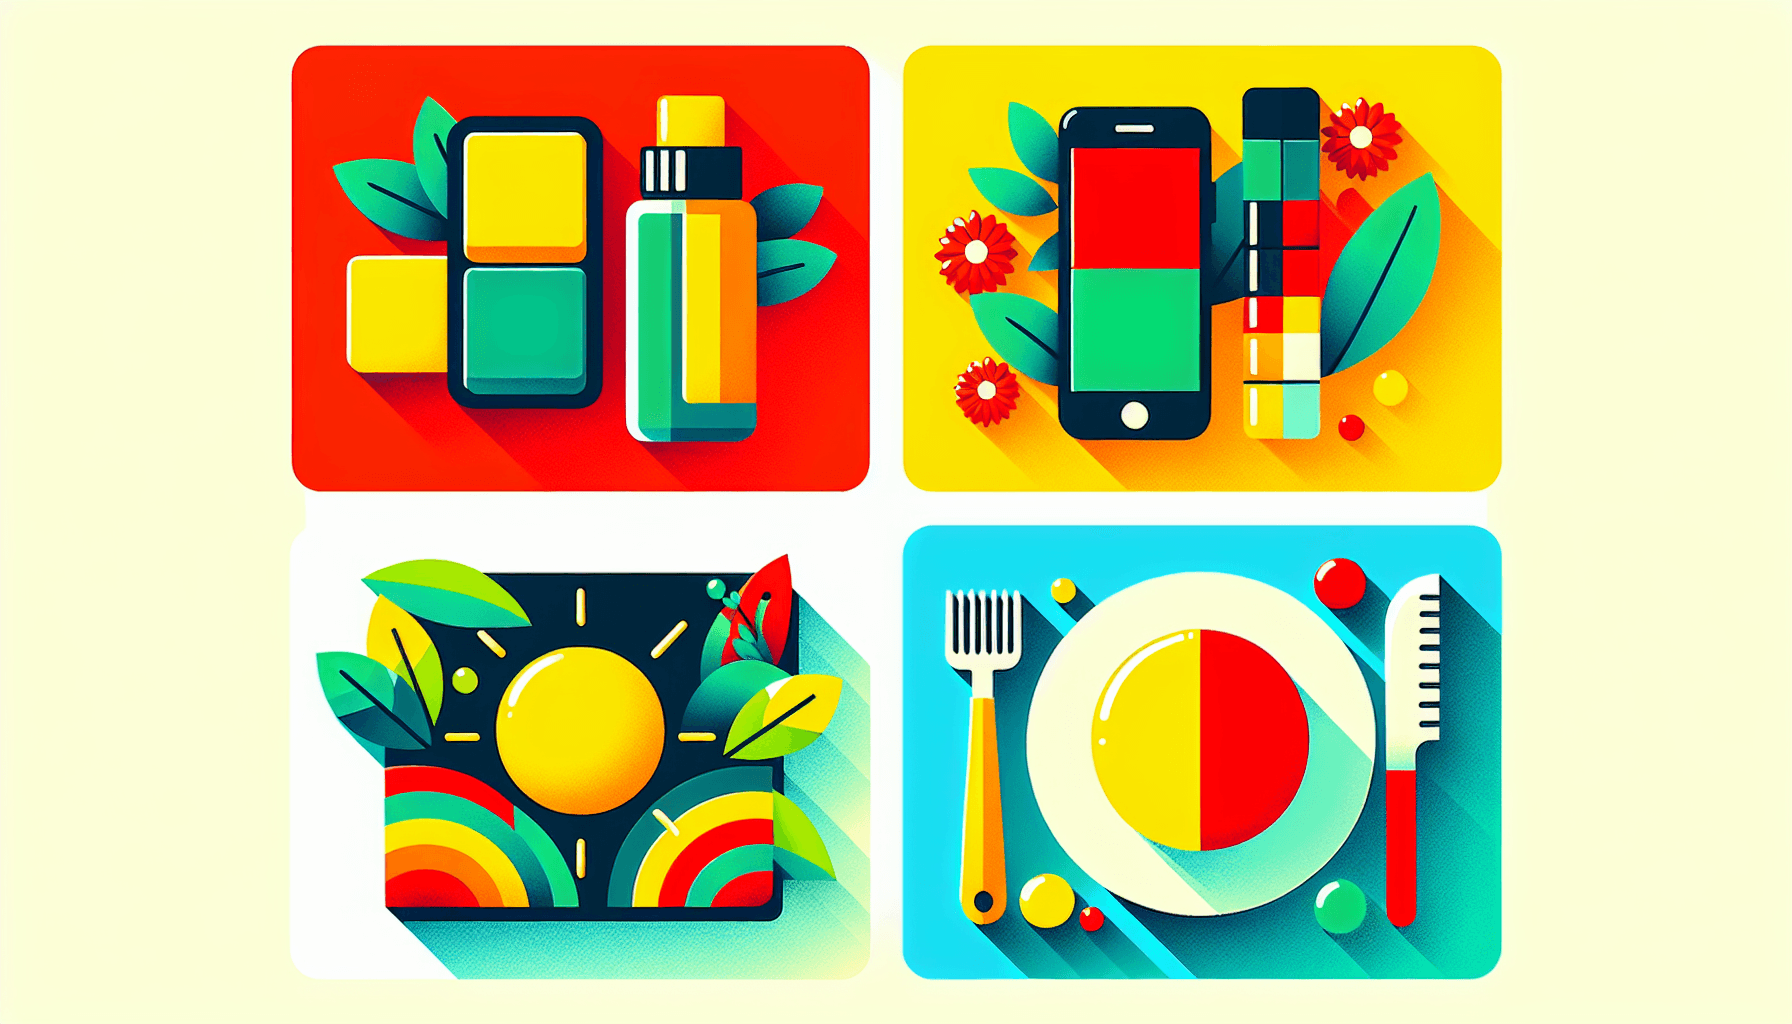 Product in flat illustration style and white background, red #f47574, green #88c7a8, yellow #fcc44b, and blue #645bc8 colors.